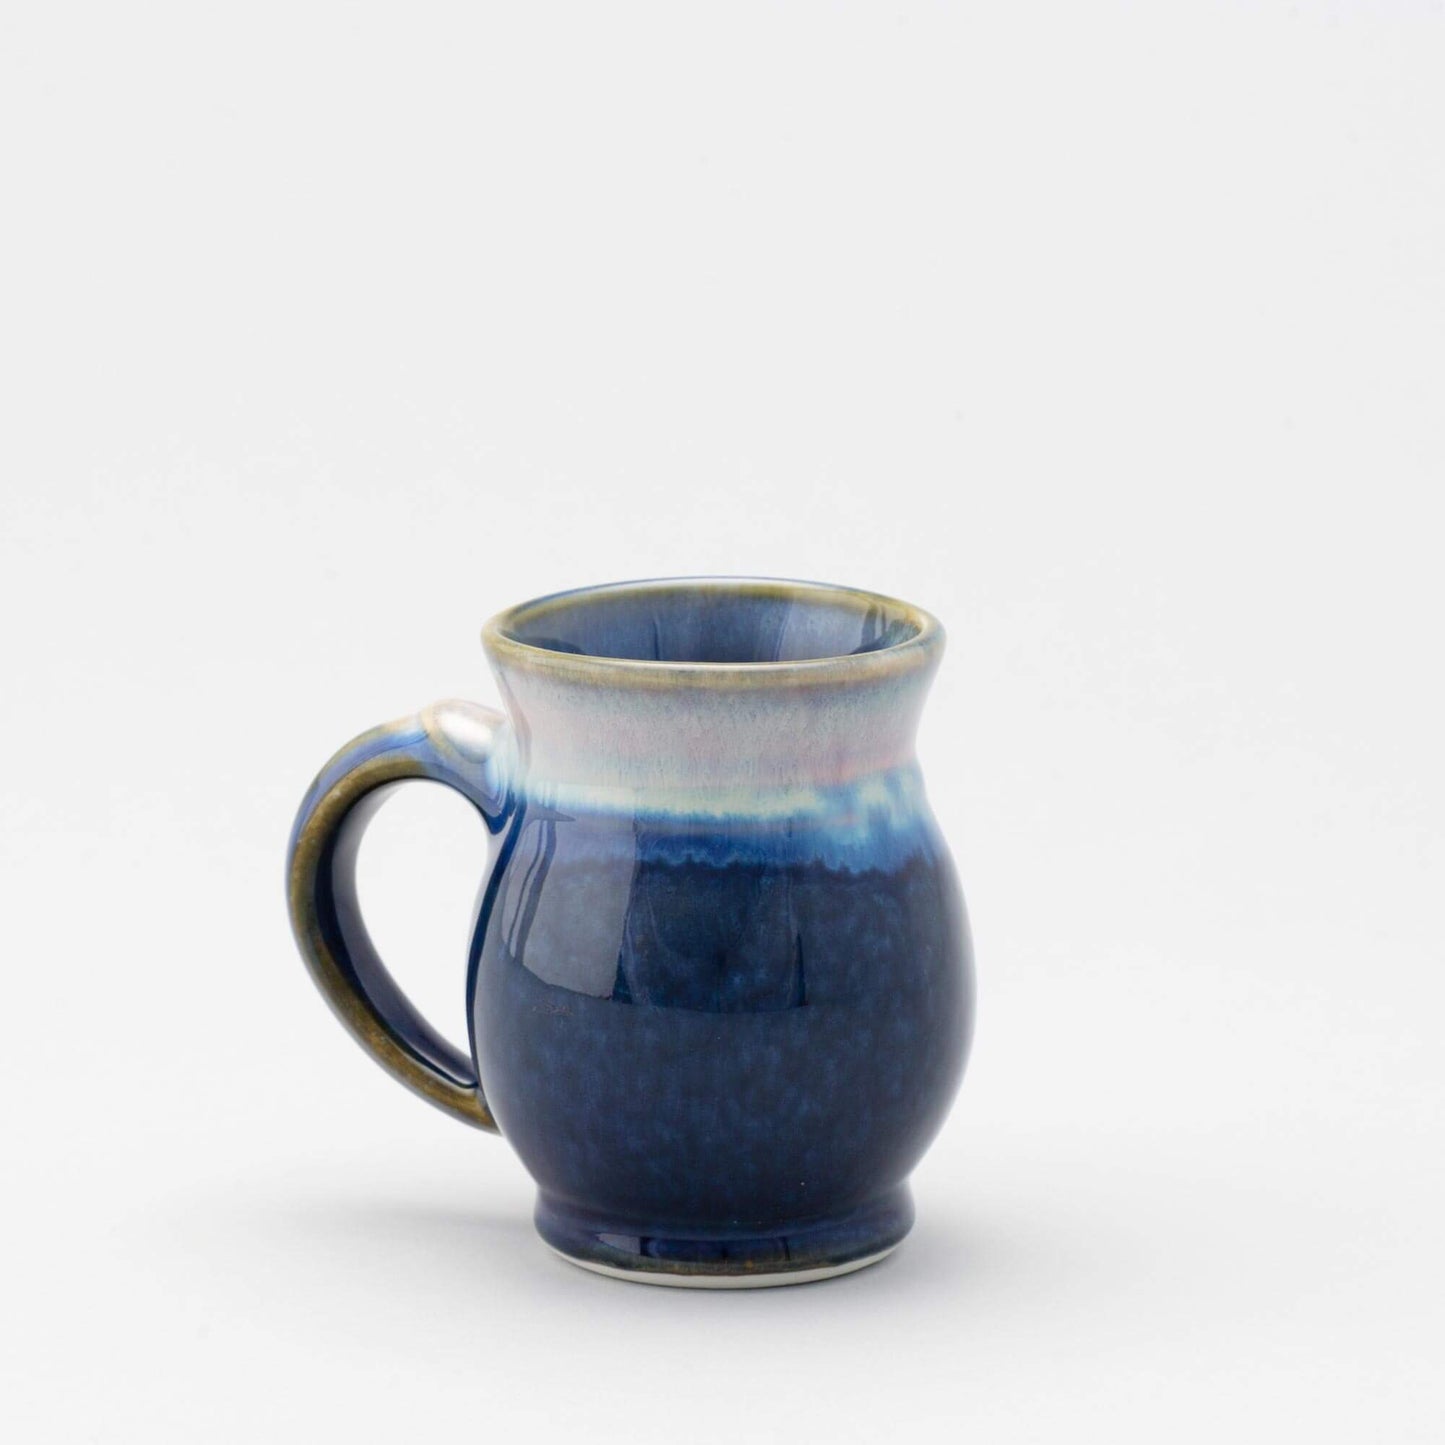 Handmade Pottery Curvy Mug made by Georgetown Pottery in Maine Cobalt